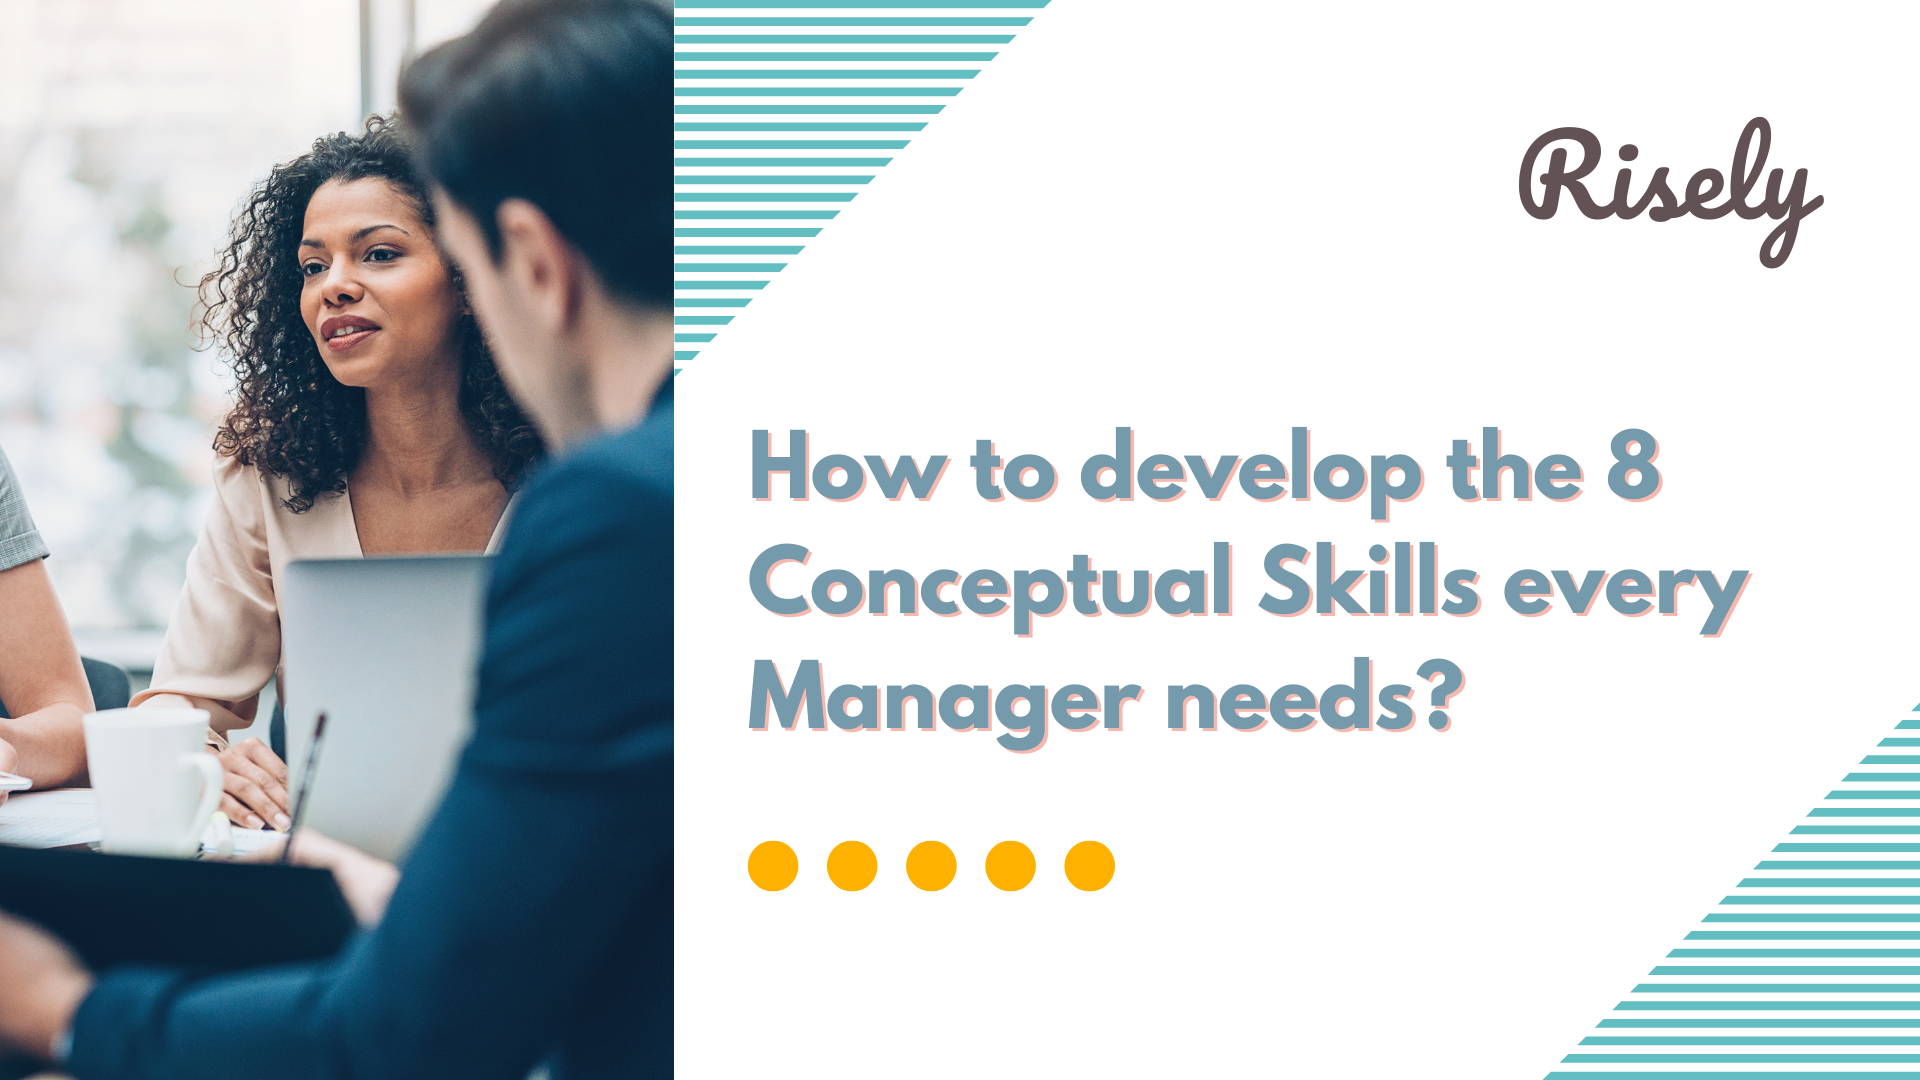 How to develop the 8 Conceptual Skills every Manager needs?